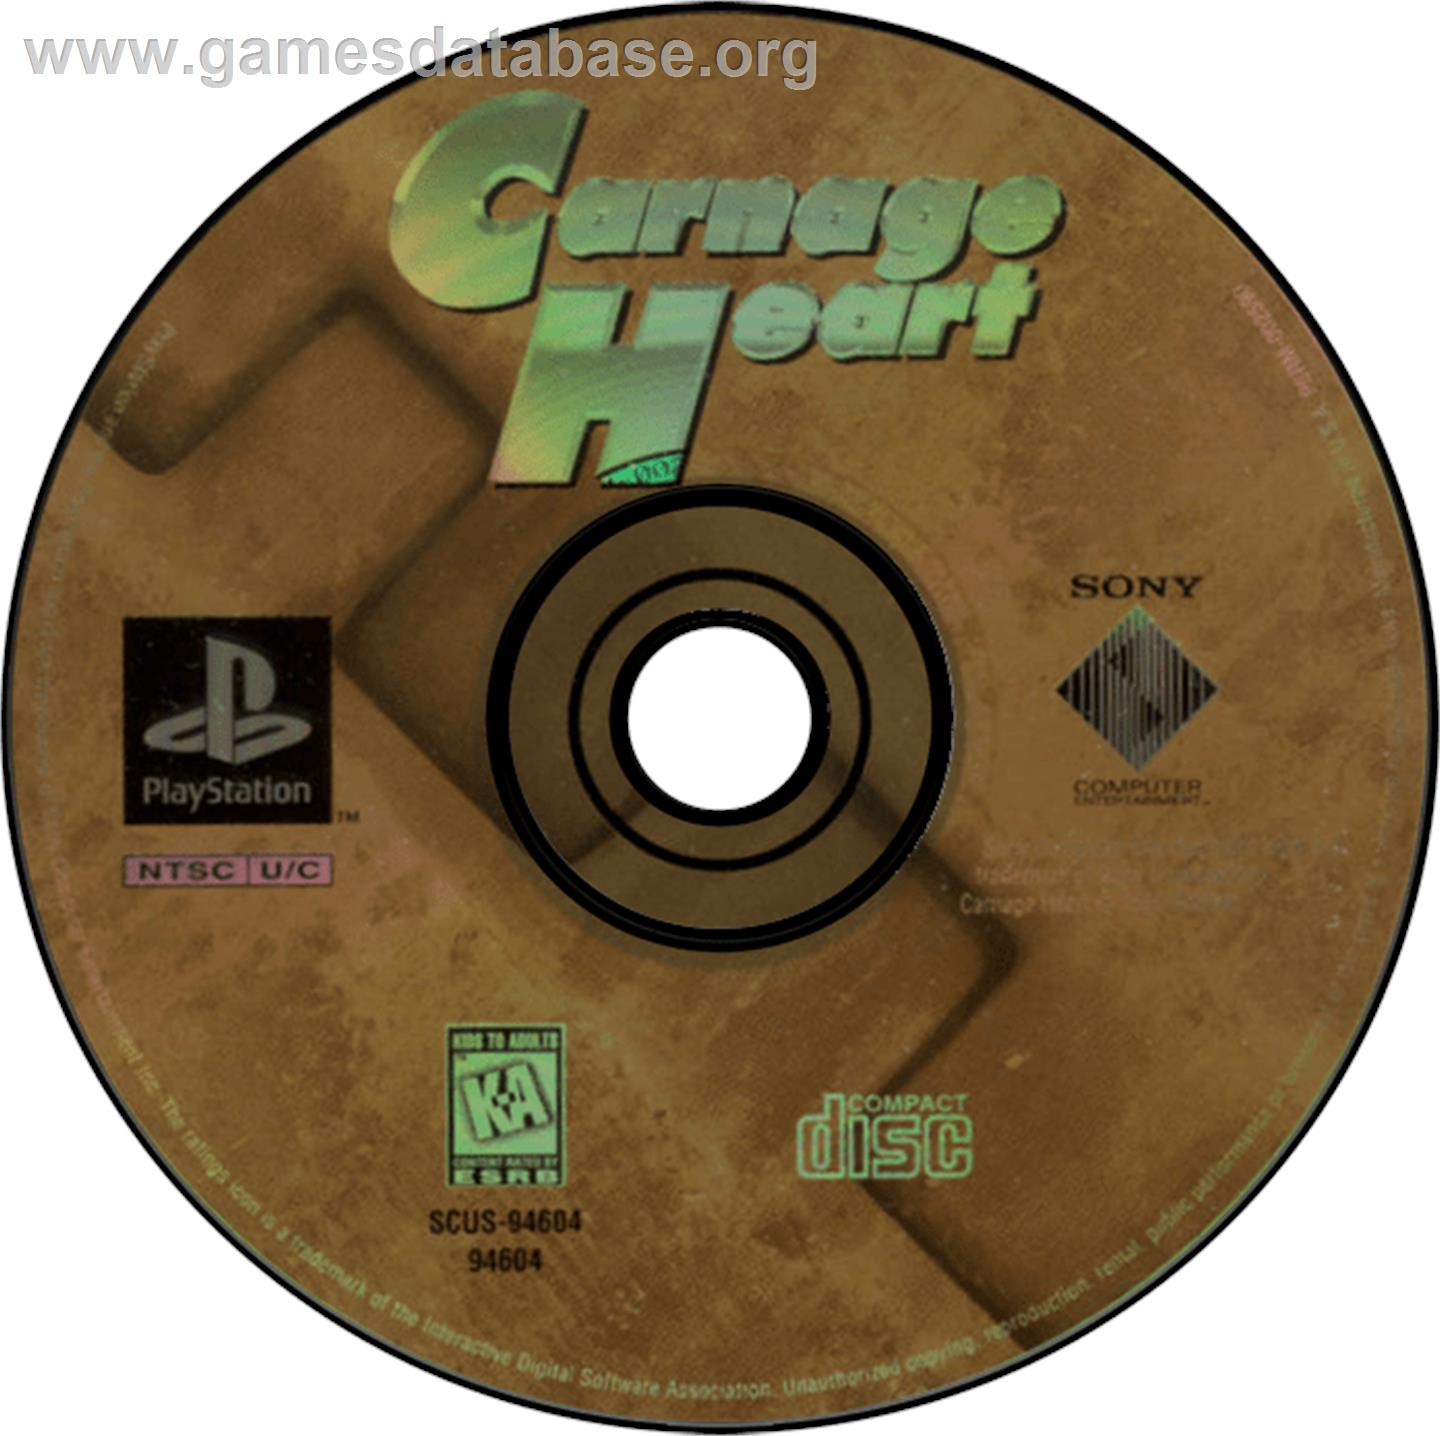 Carnage Heart - Sony Playstation - Artwork - Disc